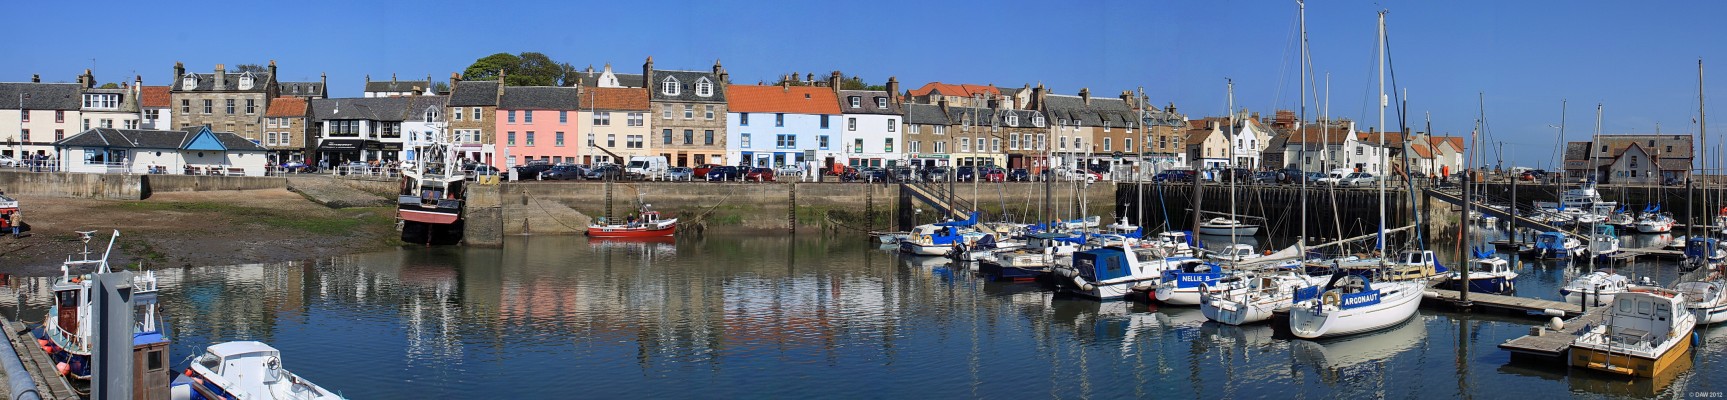 Anstruther Harbour
Anstruther is the largest of the East Neuk of Fife's fishing villages.  The harbour was once busy with fishing boats but has now been taken over by pontoons for yachts.   The Scottish Fisheries Museum is one of the buildings on the right of the photo.
